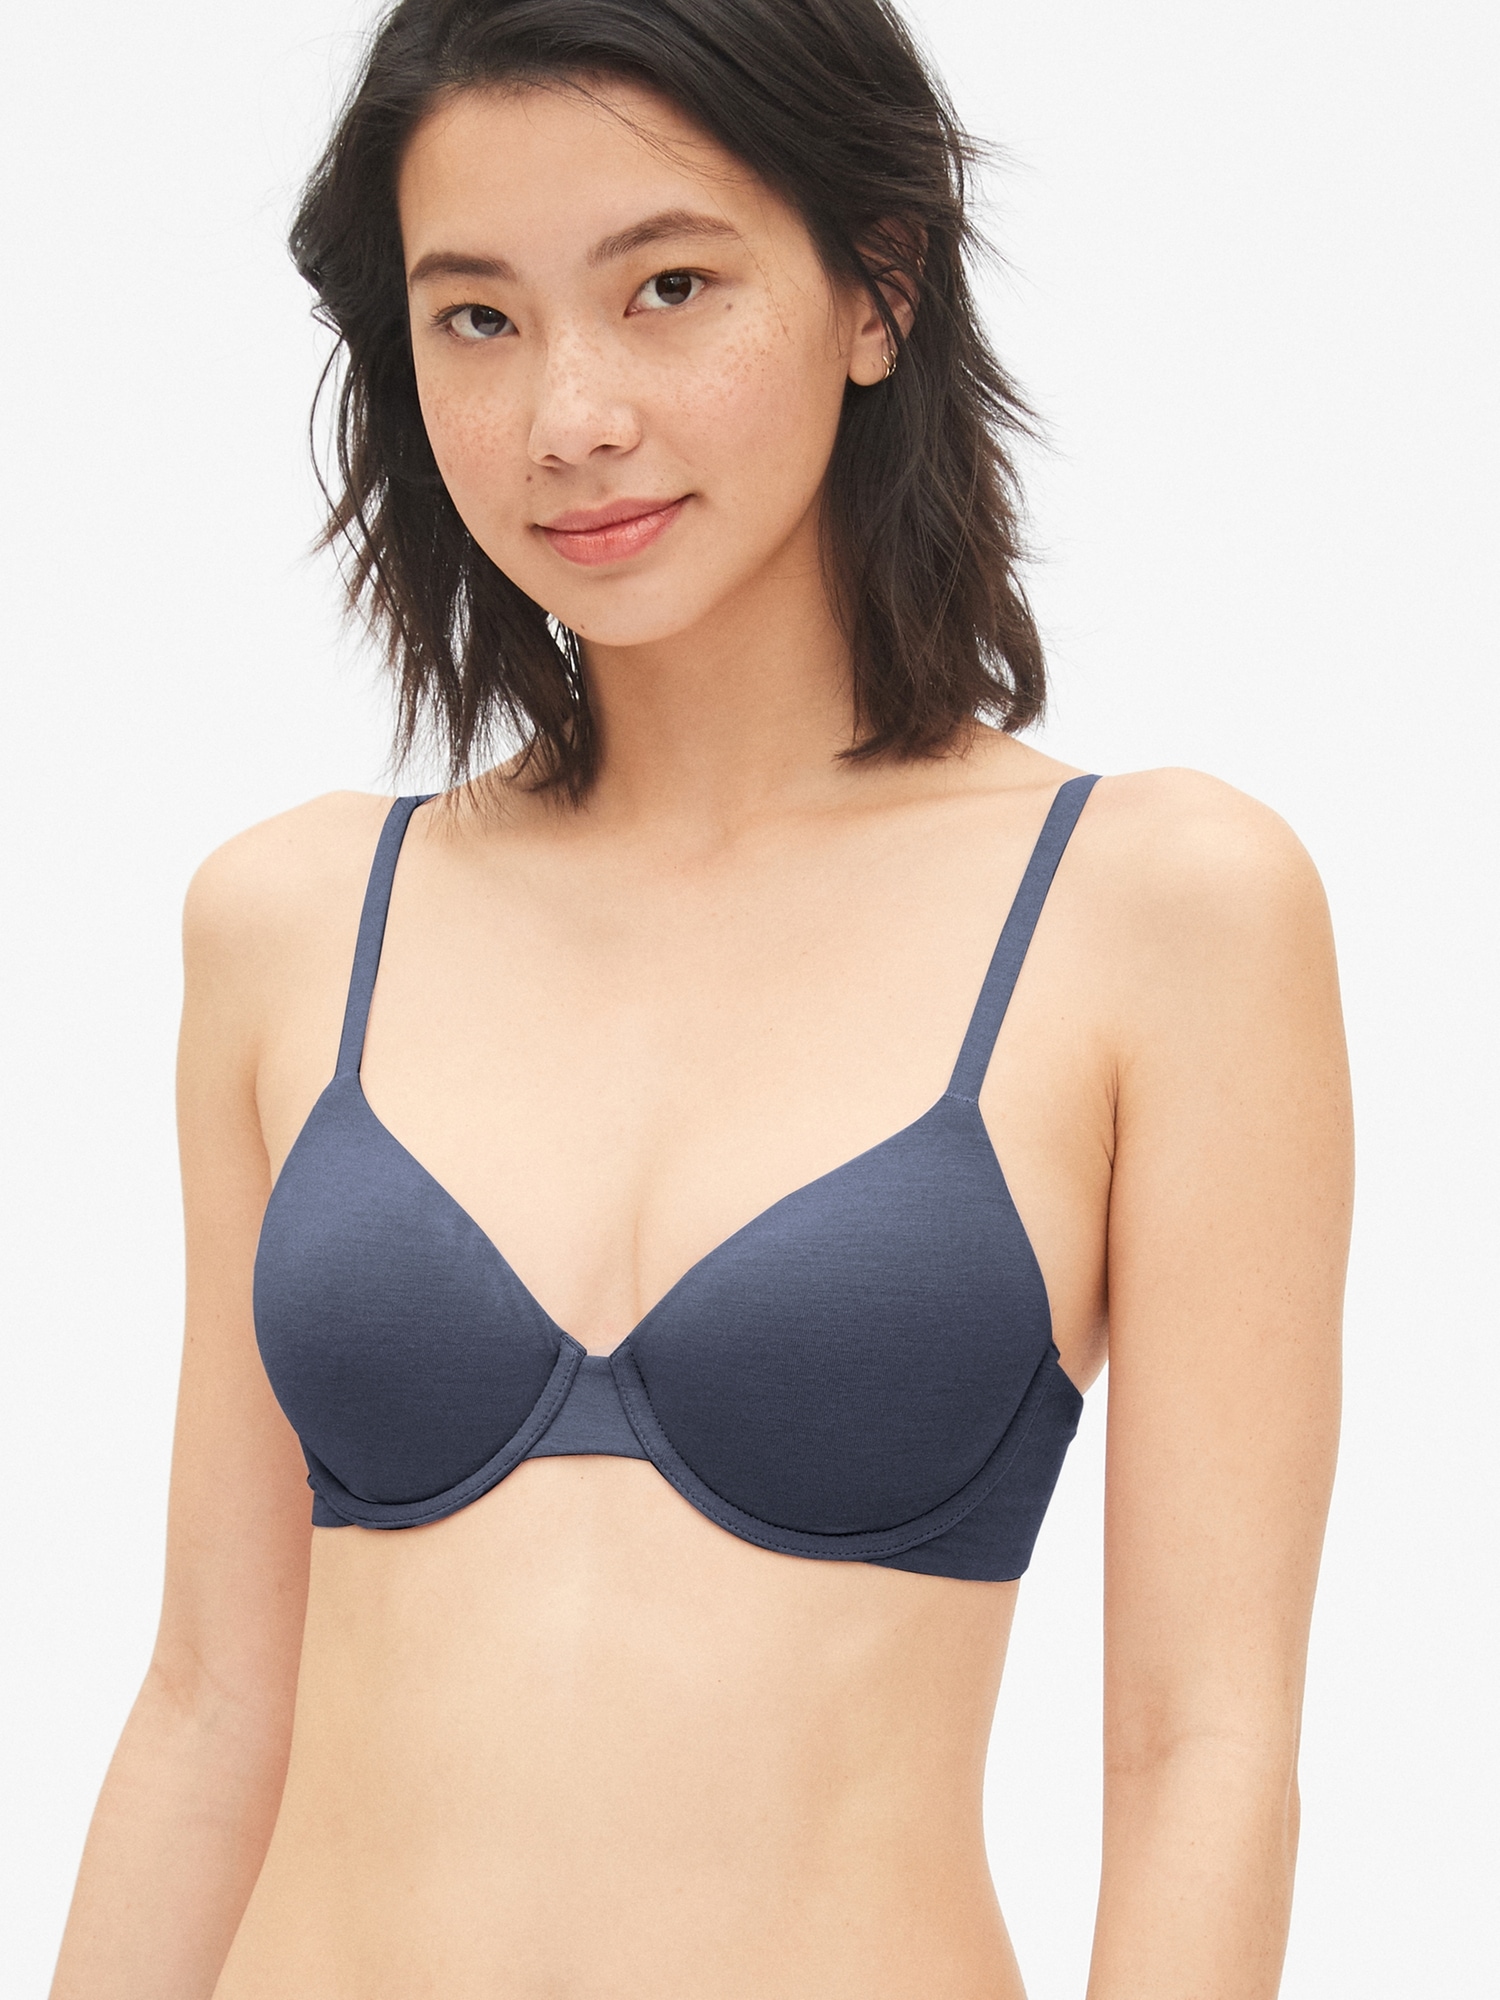 Women Without Steel Ring Small Breasts Gathered Thin Bra